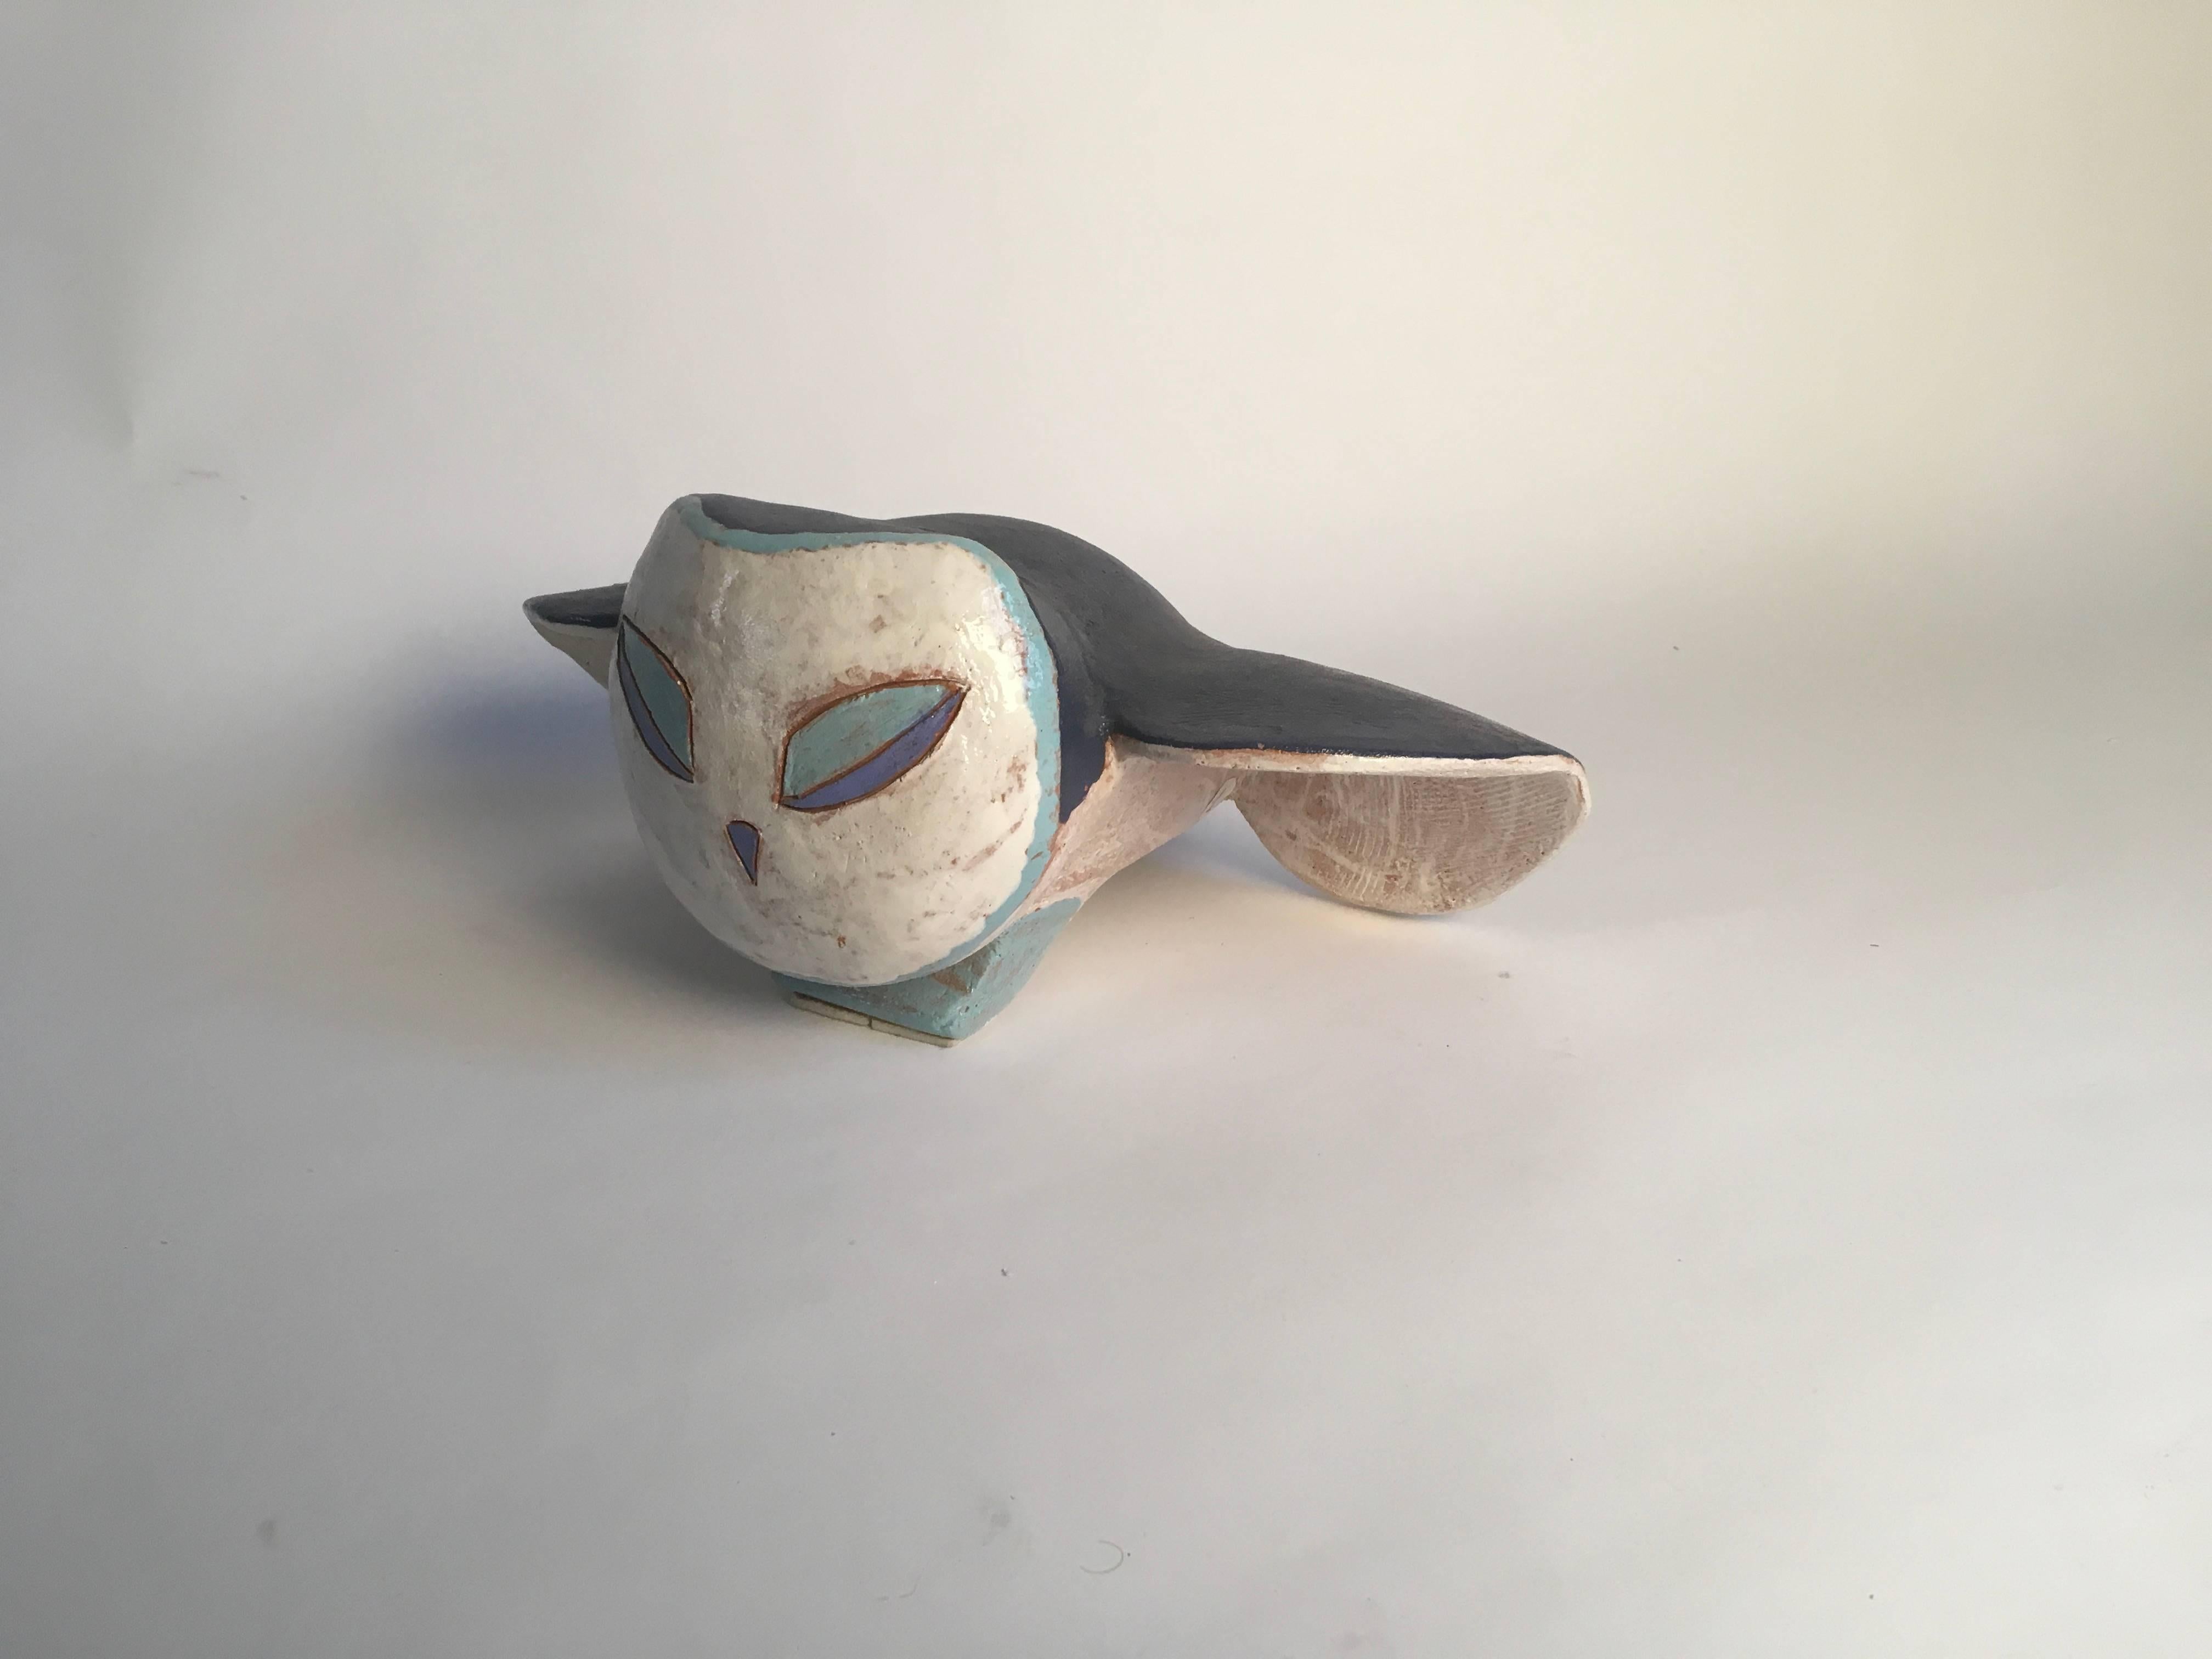 Ceramic sculpture depicting on owl created by Franco Bratta in 2006, Albisola. Signed.